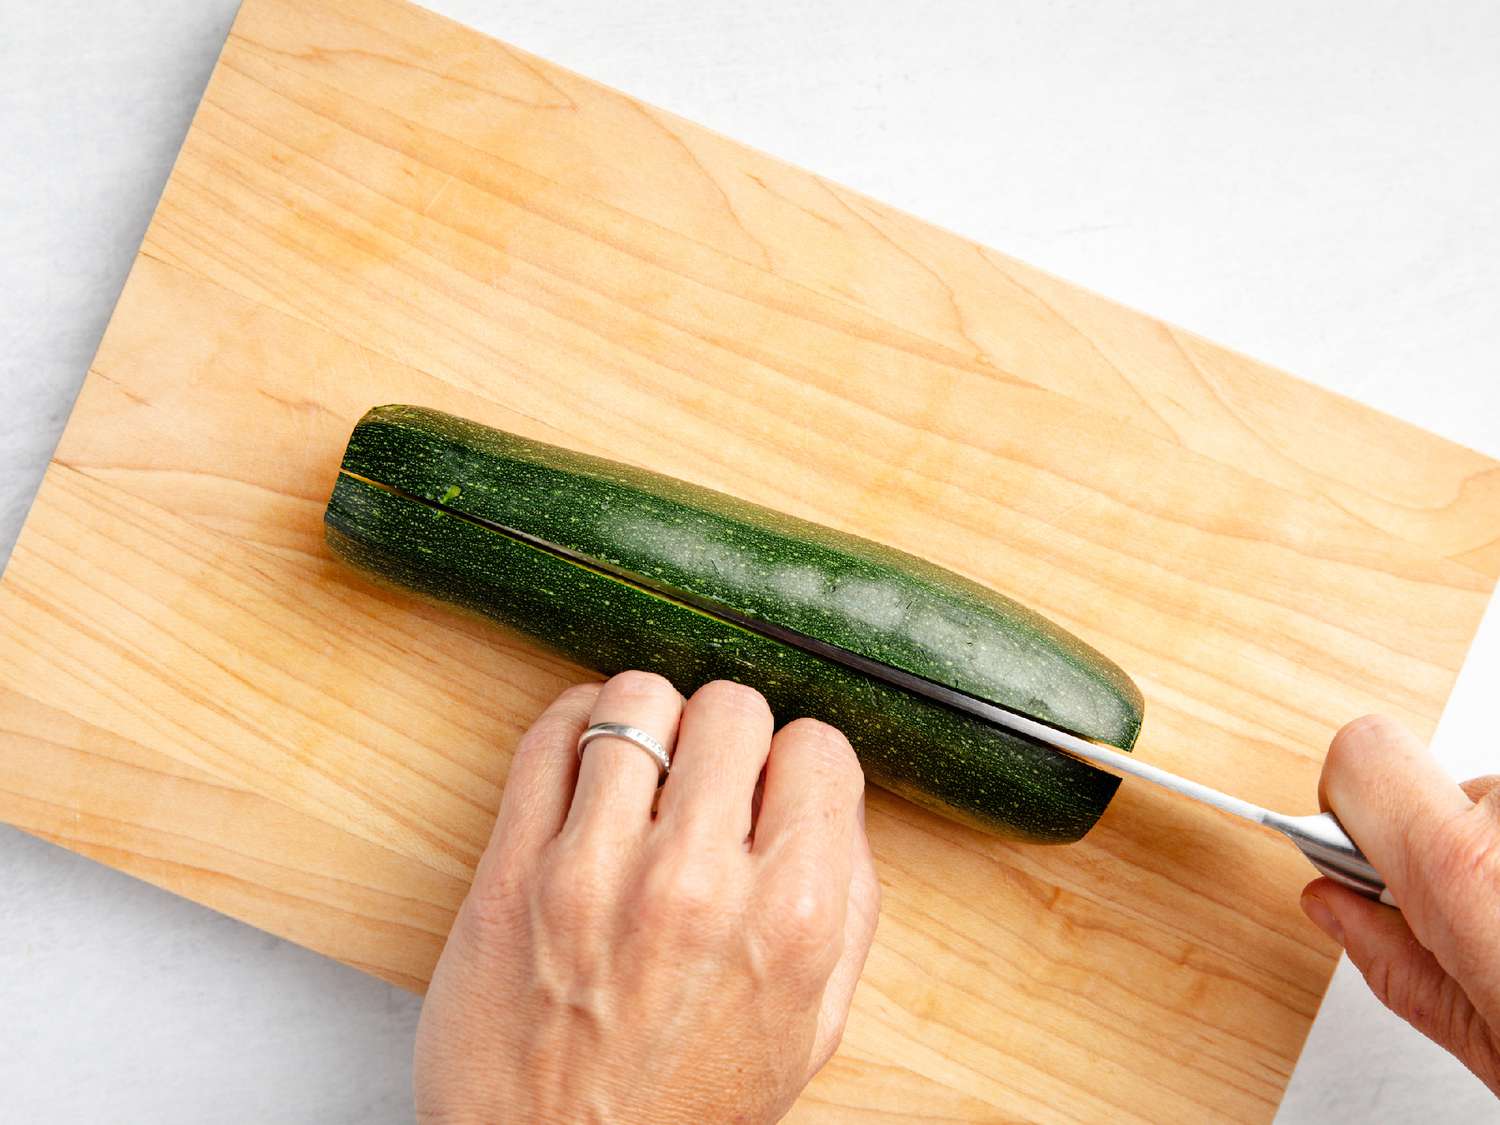 How To Store Half A Zucchini